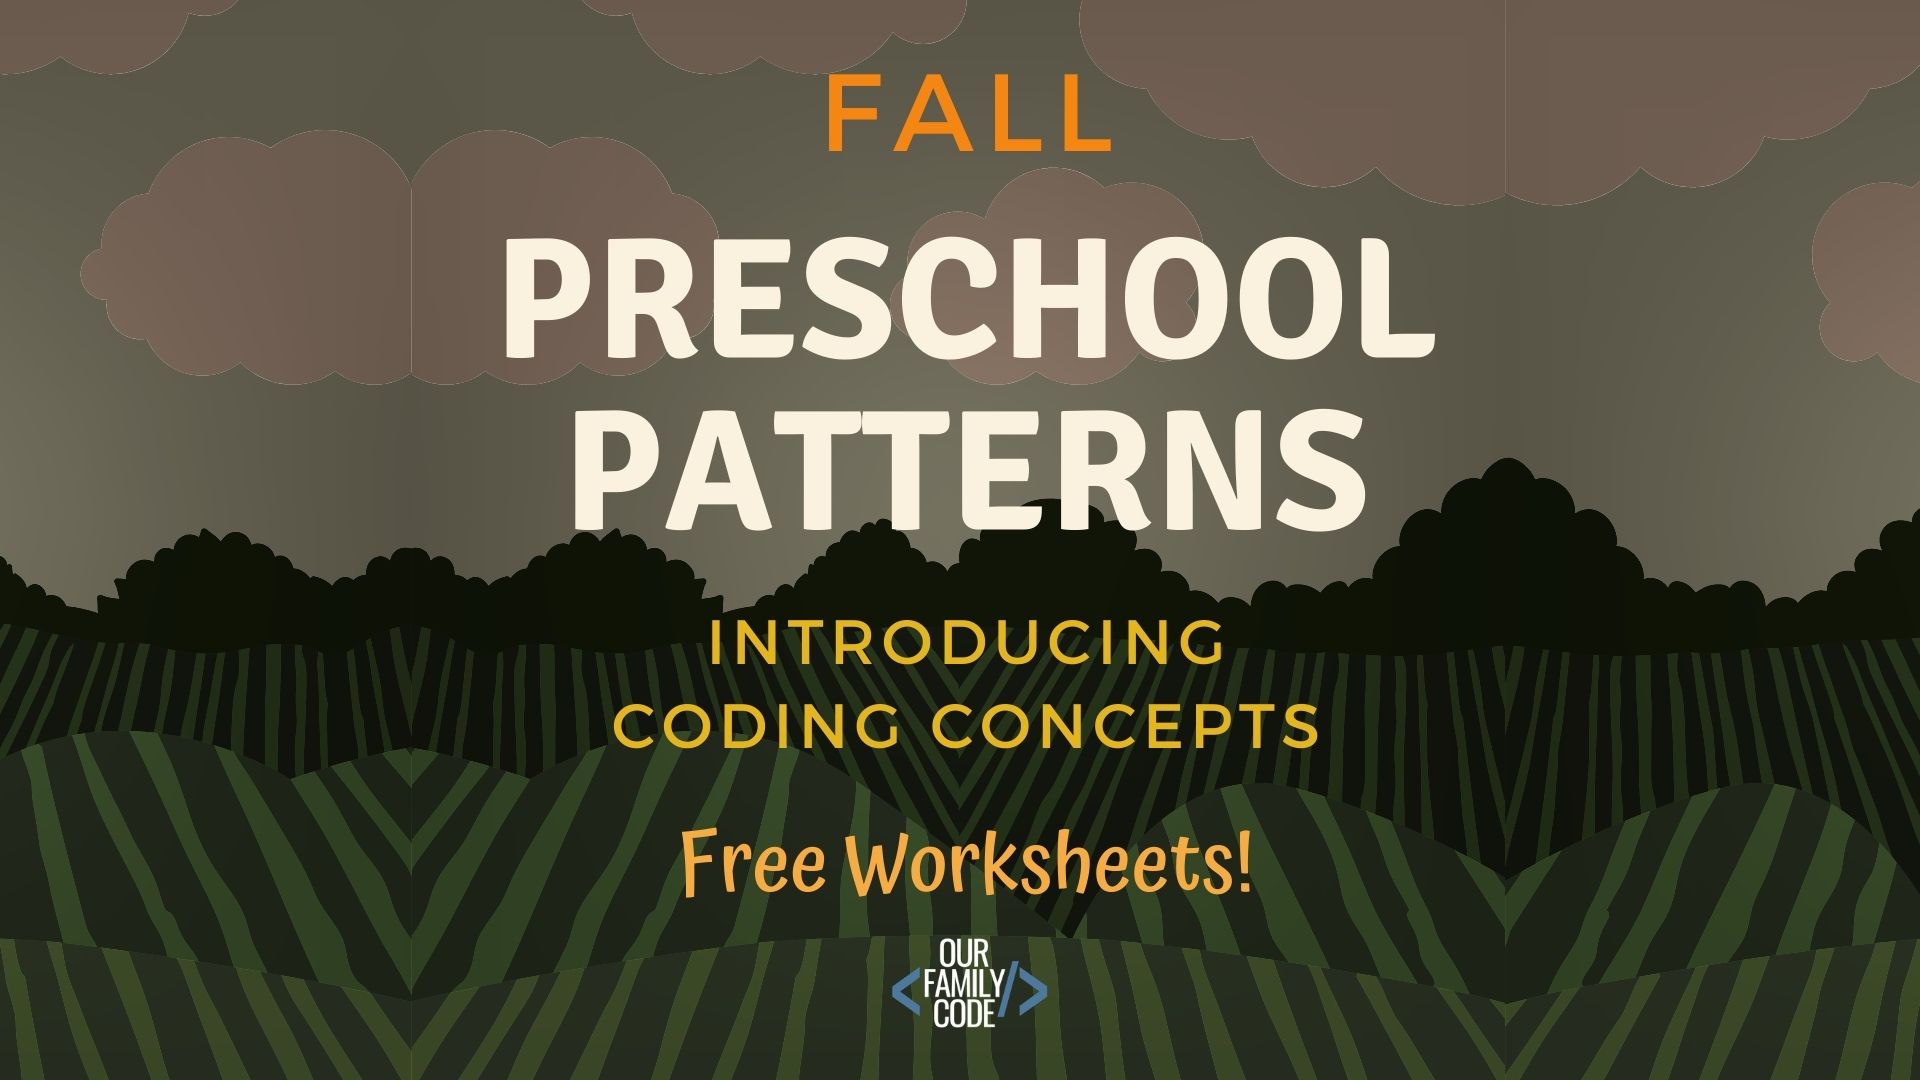 Teach your preschooler how to think like a computer programmer with these preschool Fall pattern worksheets that introduce coding concepts. #teachkidstocode #preschoolmathactivities #preschoolcoding #unpluggedcoding #hourofcode